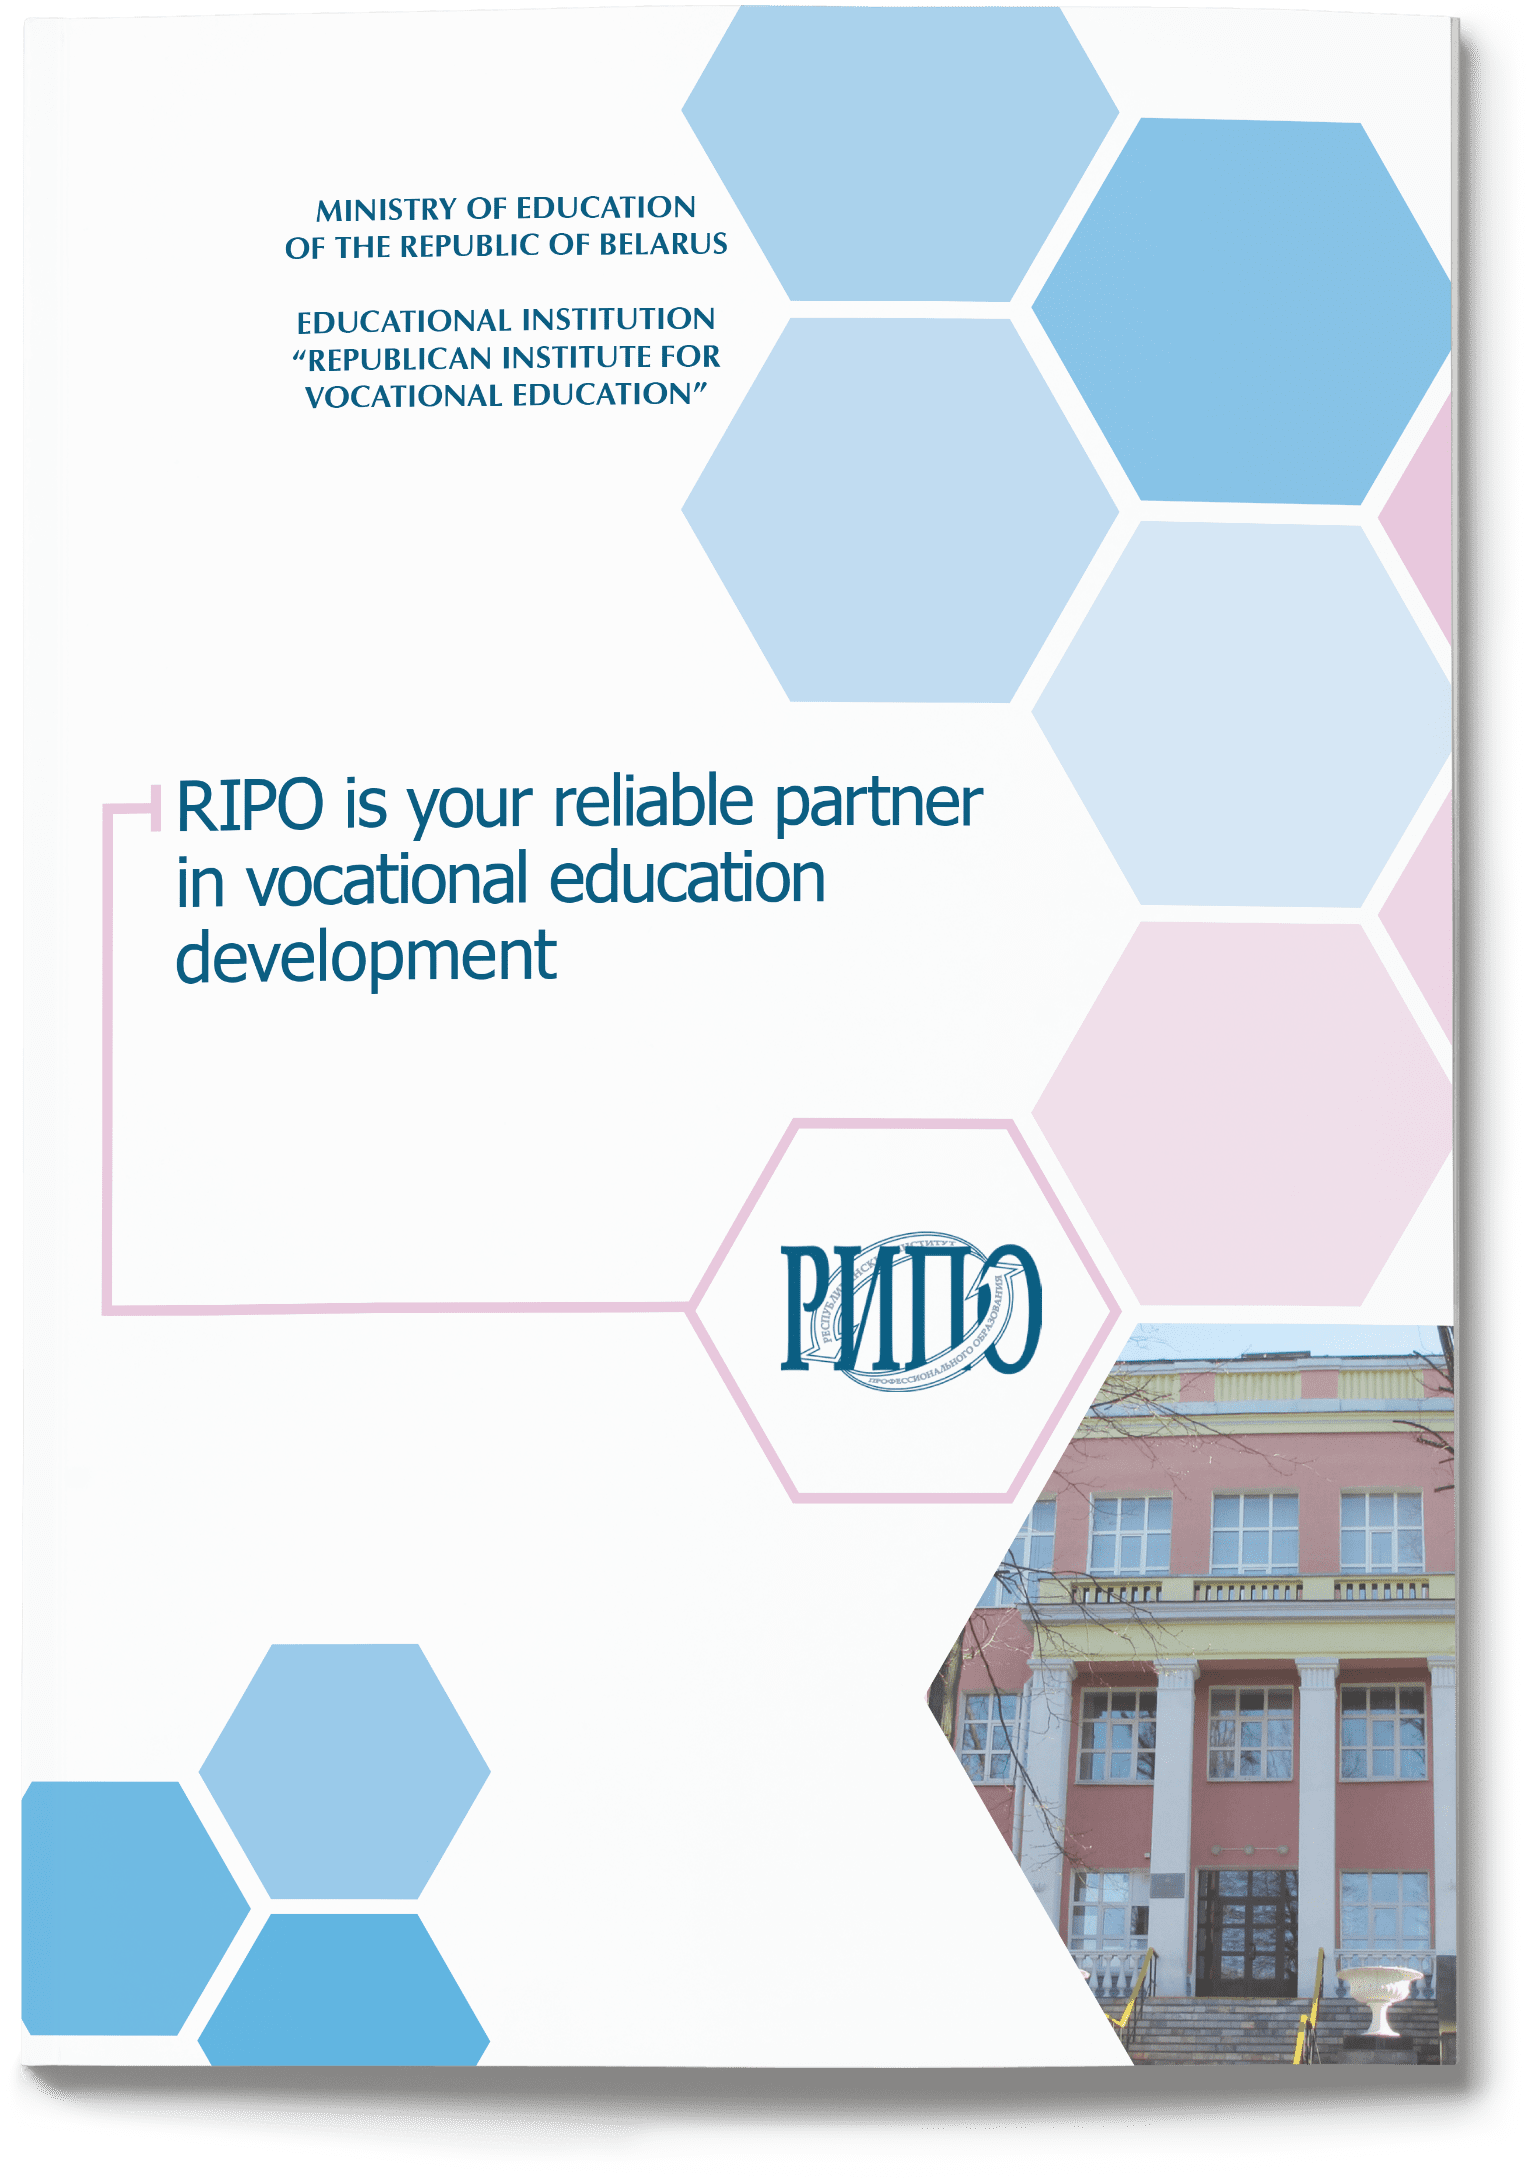 RIPO is your reliable partner in vocational education development